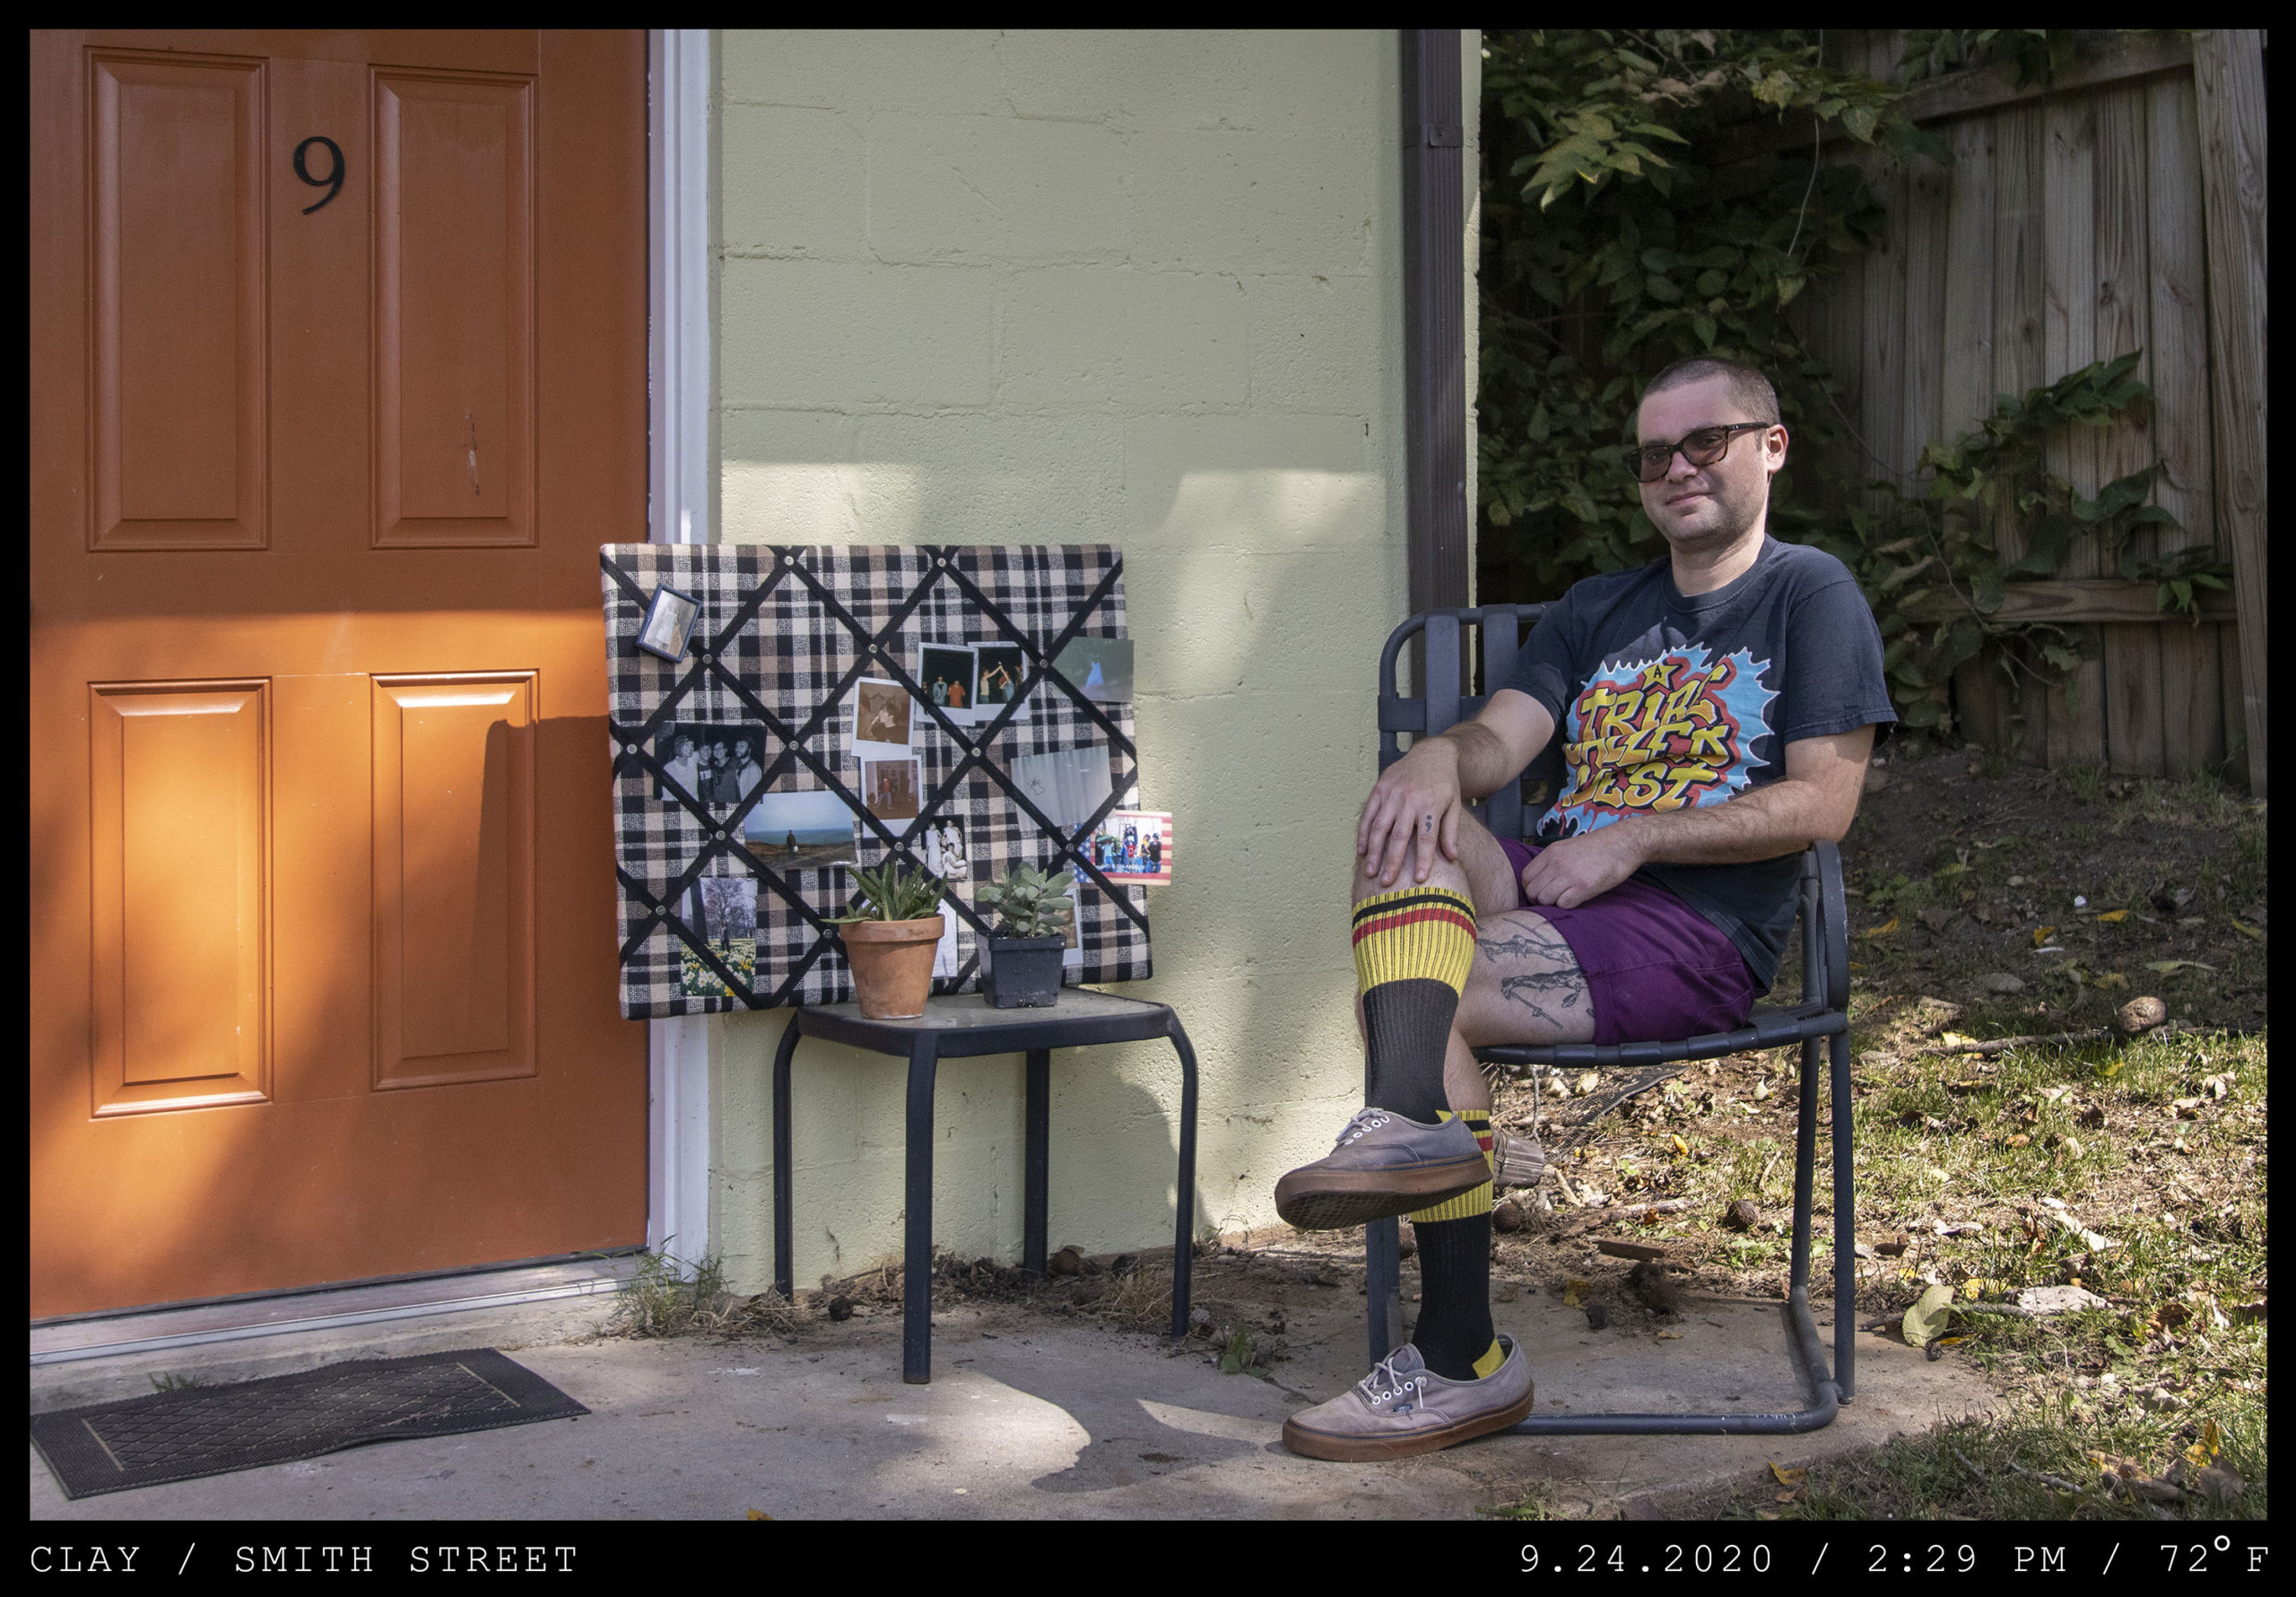 A young man in sunglasses is seated on a front porch in a colorful tee shirt and high yellow socks.